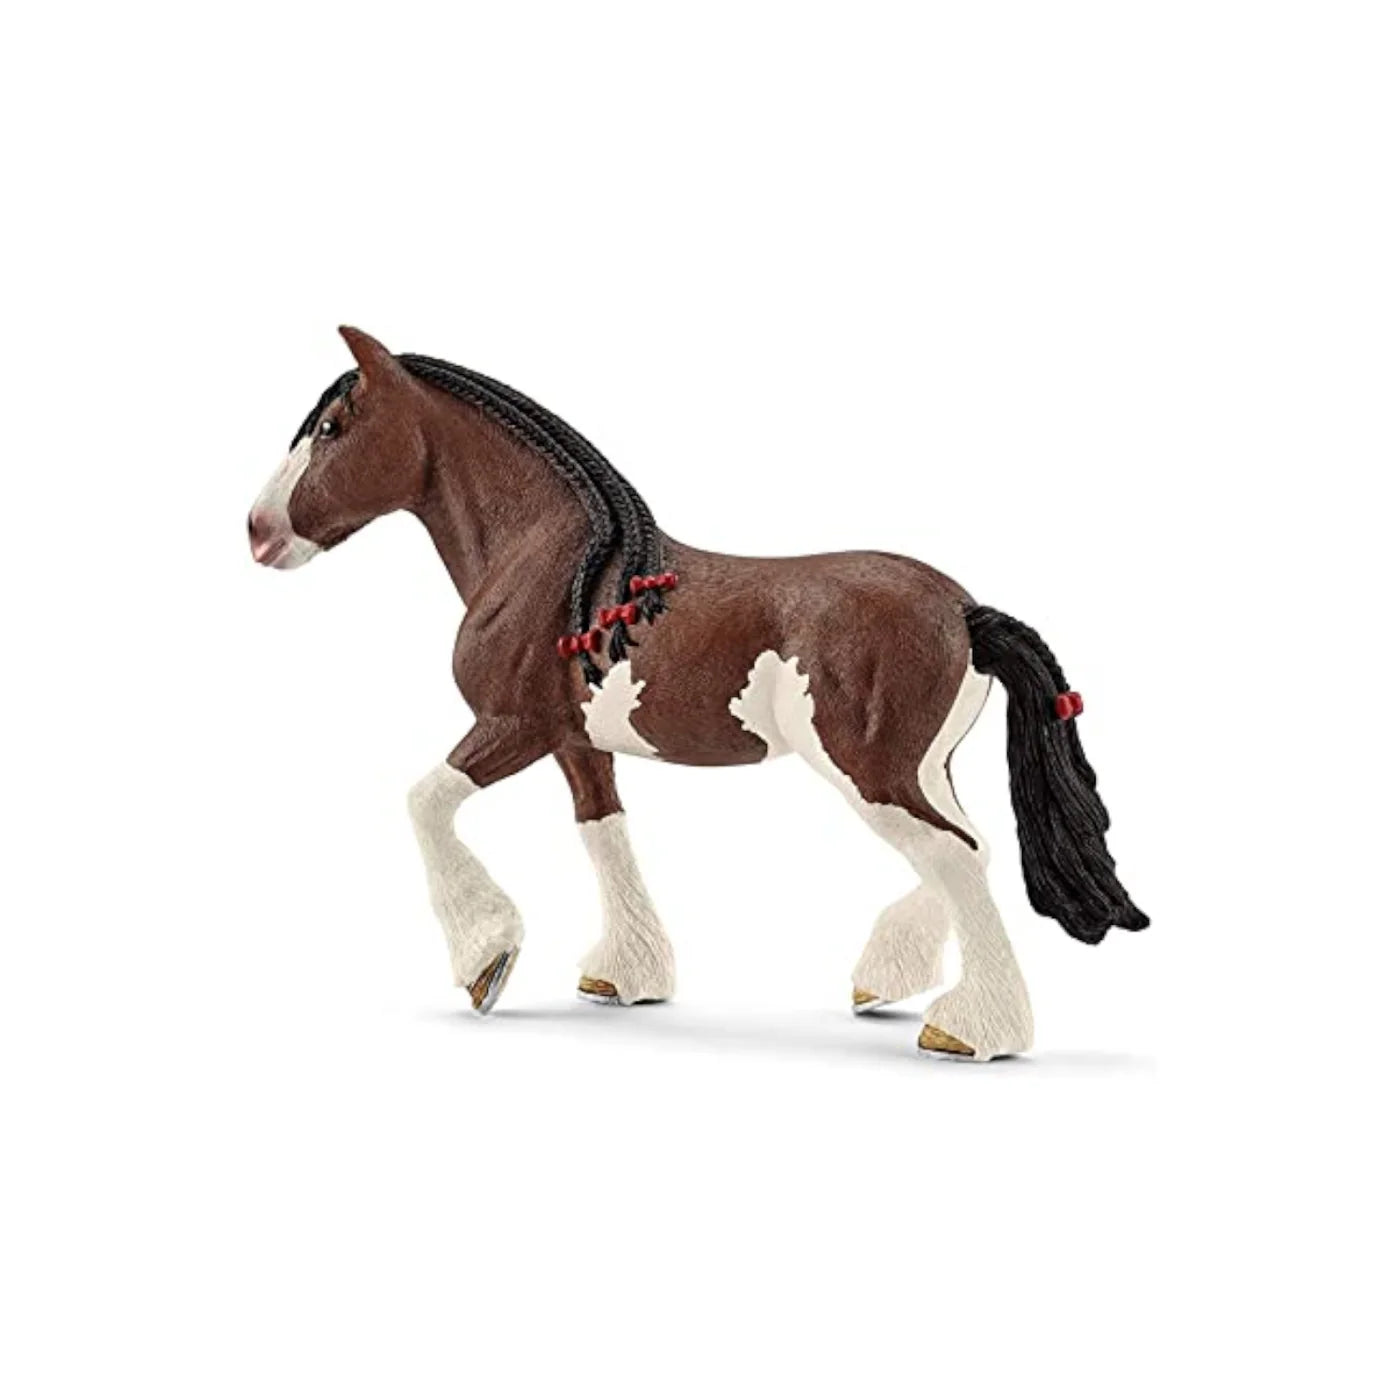 Jument Clydesdale 13809